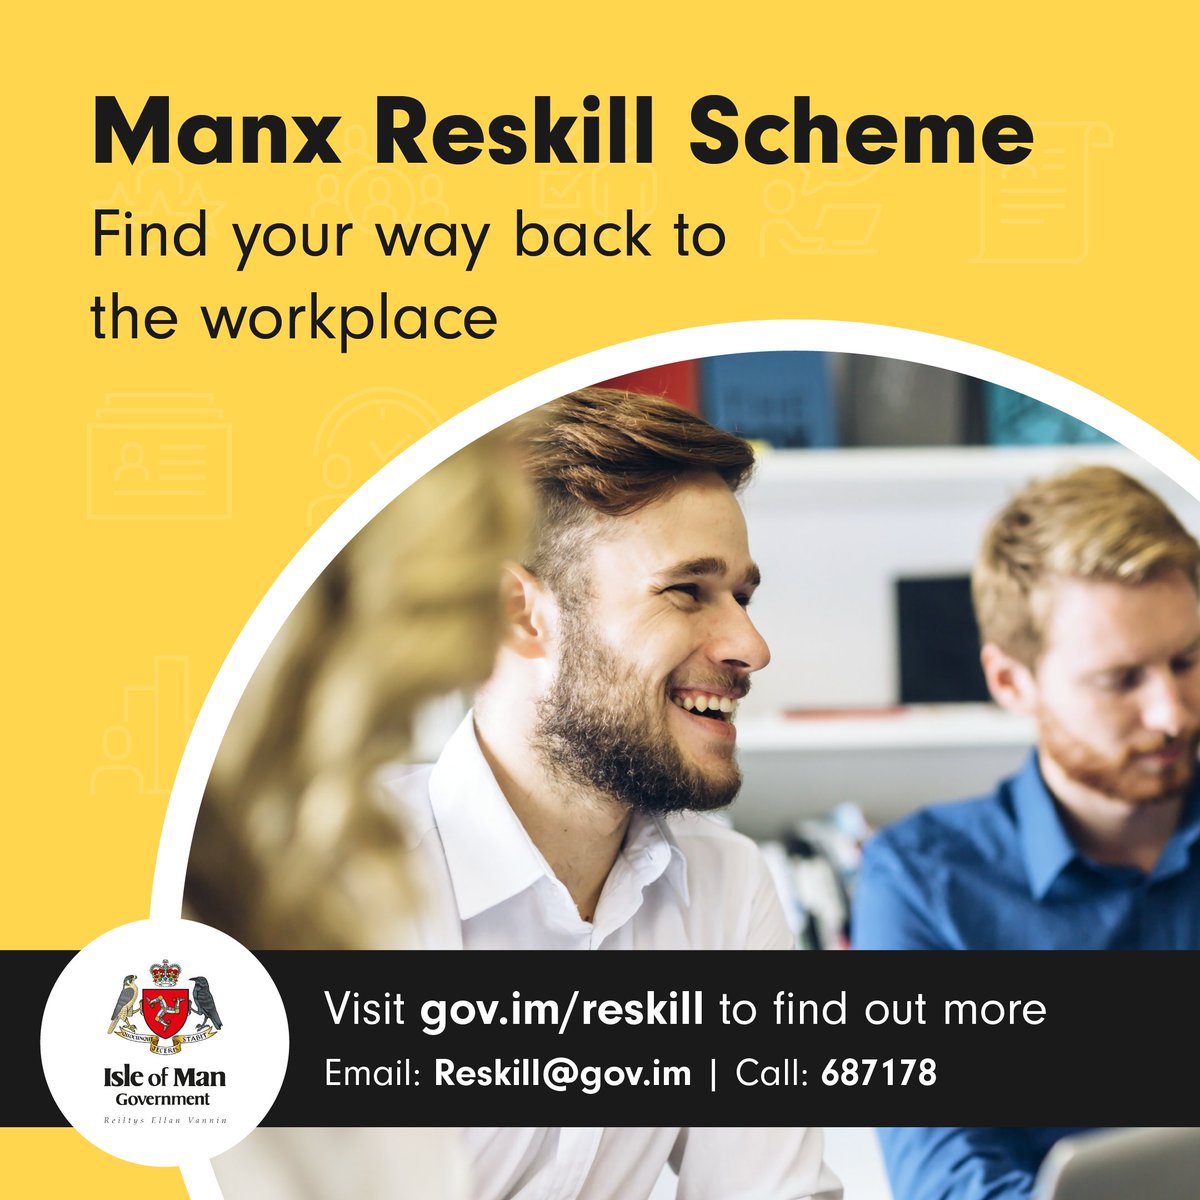 The Manx Reskill Scheme offers job opportunities to people with long-term health conditions or disabilities. Roles are matched to skills, experience and aspirations, and full support is available. Visit gov.im/reskill. To register, email reskill@gov.im or call 687178.